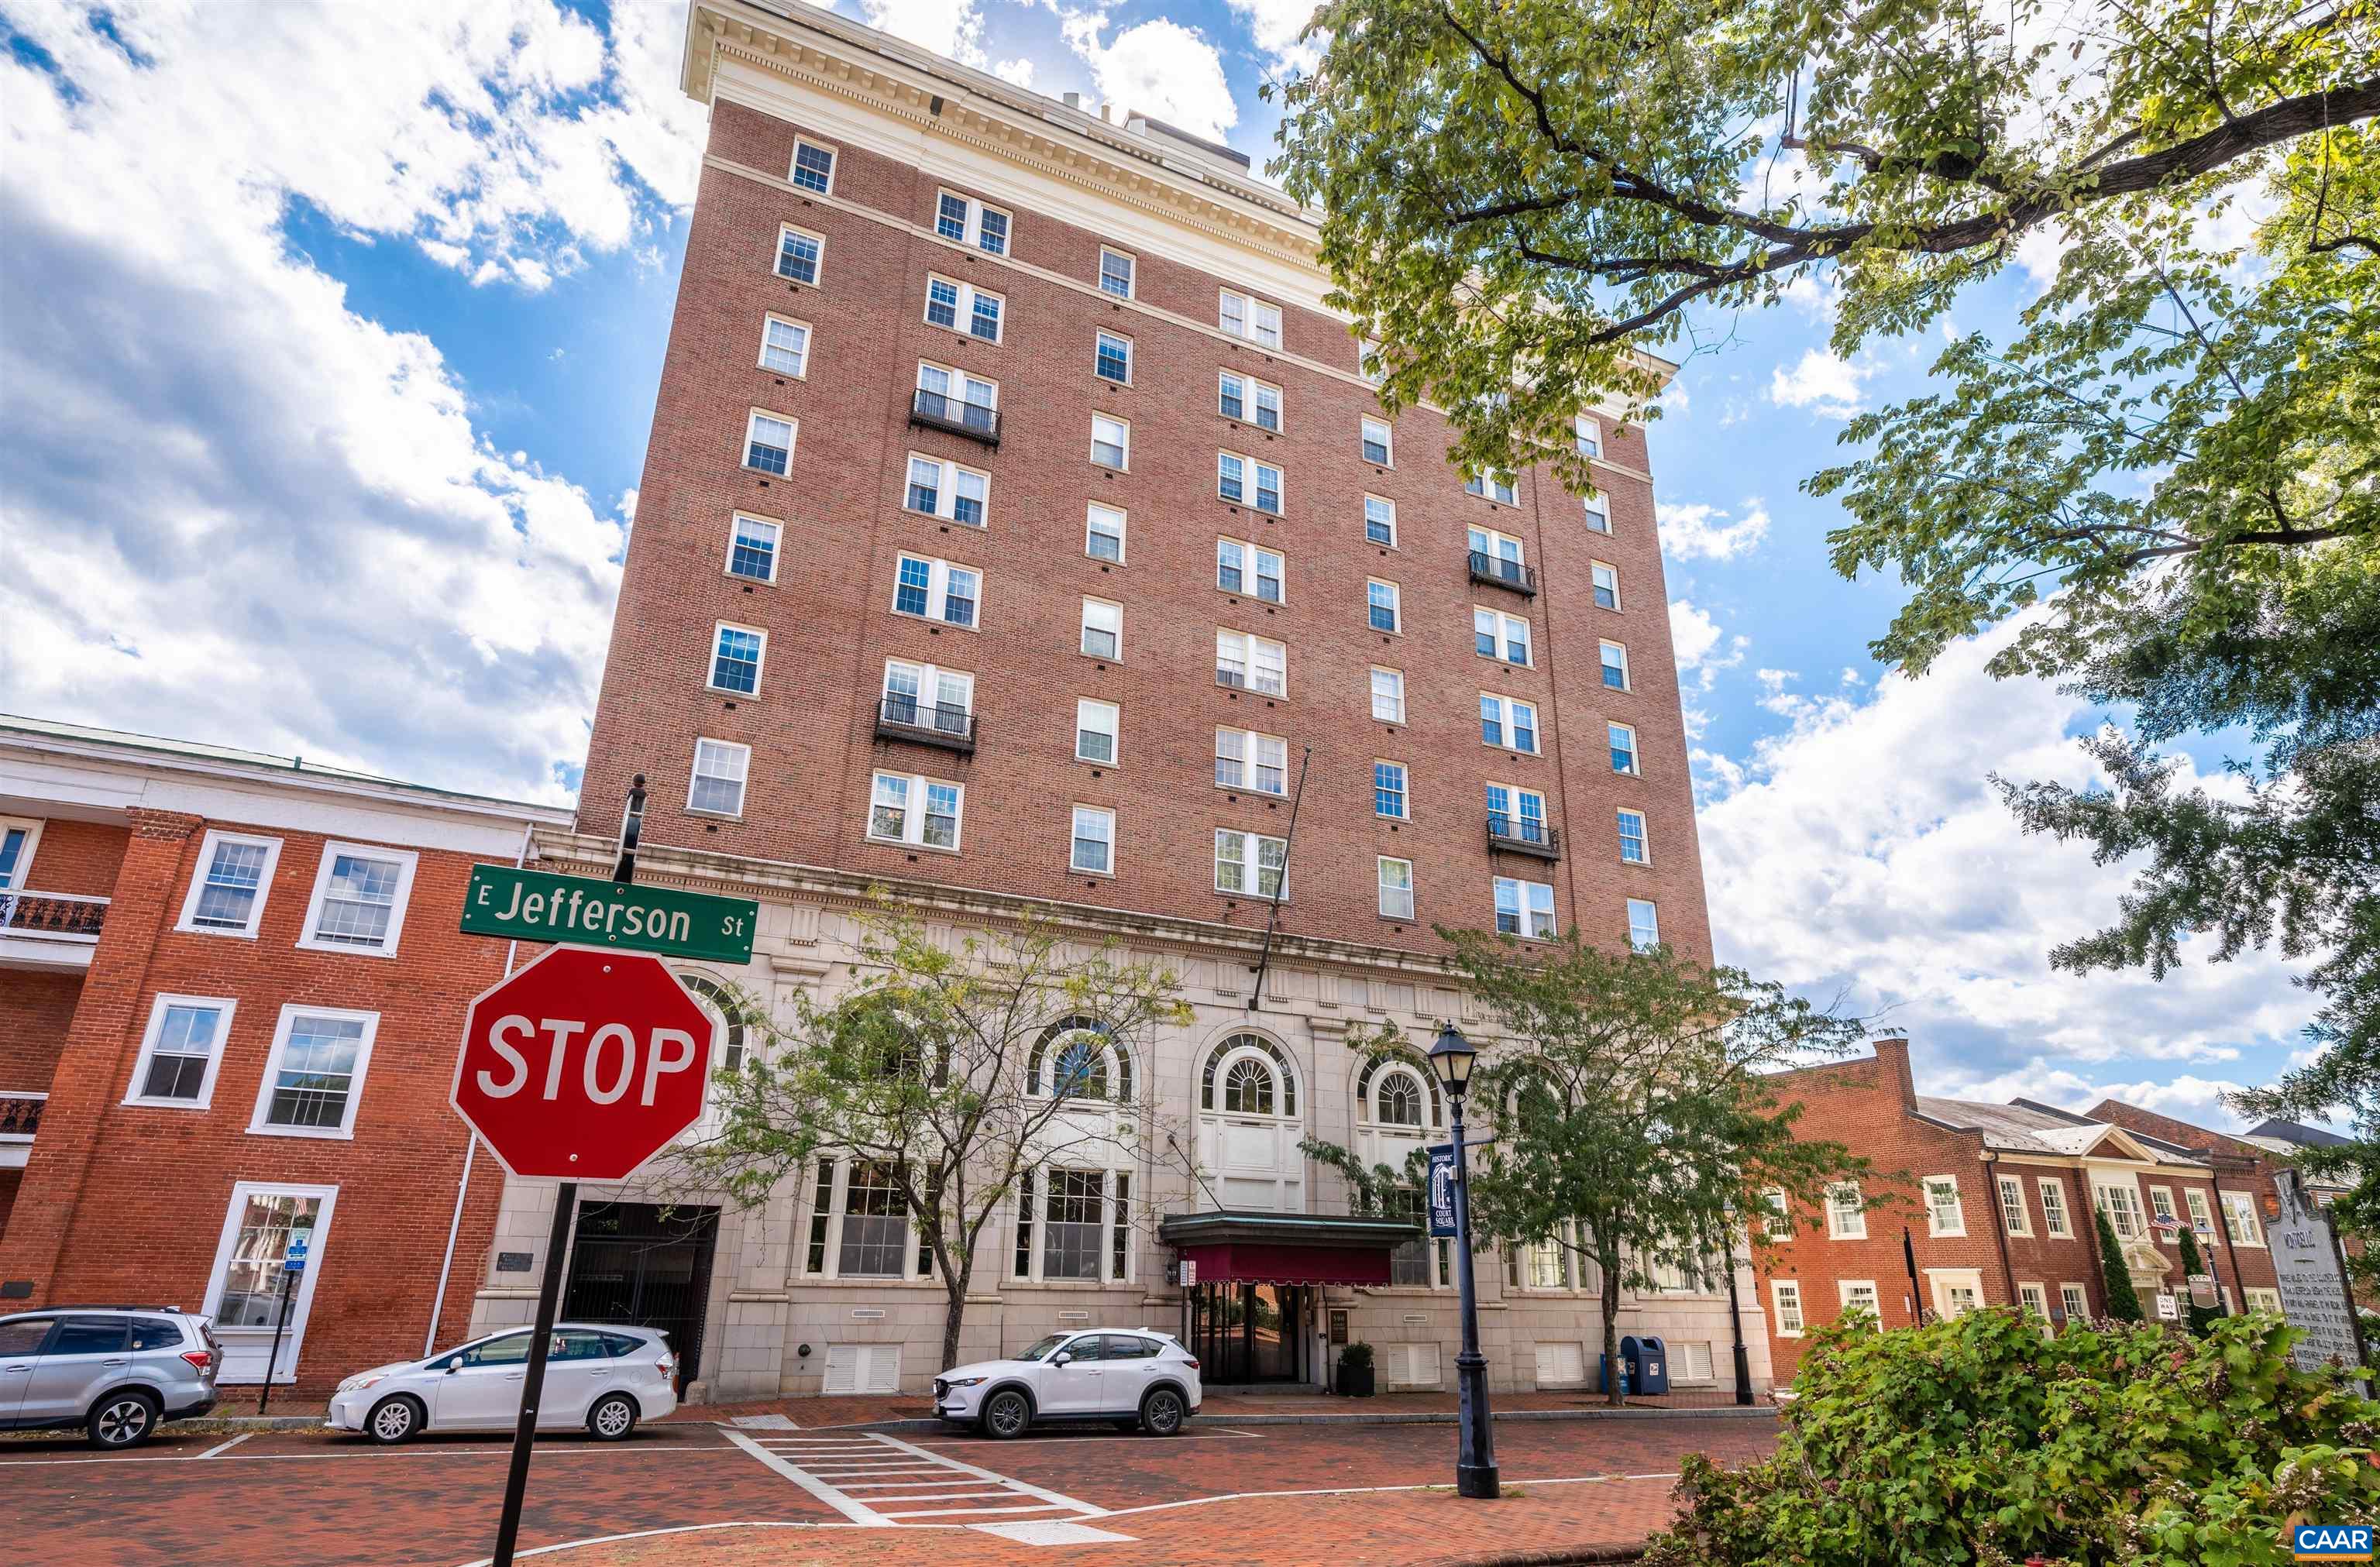 A unique opportunity to own a condo on the 9th floor of the iconic 500 Court Square in the heart of Charlottesville’s historic district. This one bedroom one bath condo has phenomenal mountain and downtown views from every window, plenty of natural light and lots of efficient space. New flooring, fresh paint – ready to move into. An easy walk to a variety of dining choices, shopping and numerous entertainment venues. HOA covers water/sewer, gas, electric, trash, and Ting fiber internet. Don't miss this!